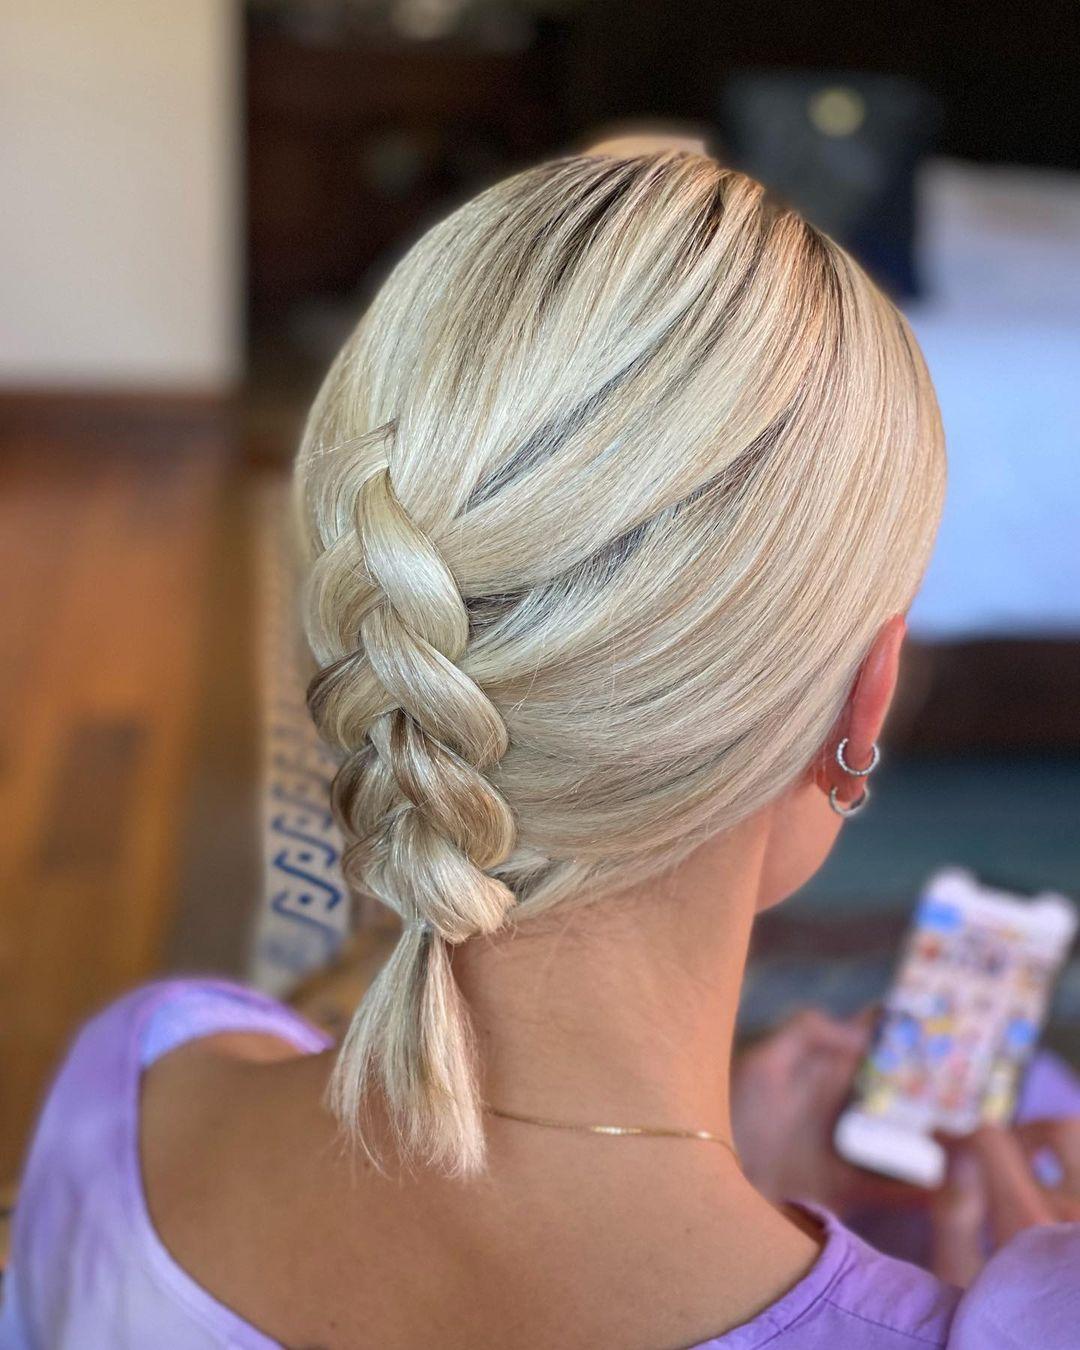 10 EASY FAUX BRAID SHORT HAIRSTYLES | 10 EASY FAUX BRAID SHORT HAIRSTYLES:  Topsy Tails Here is a great hair tutorial video that will help transform  your hair with topsy tails. Let